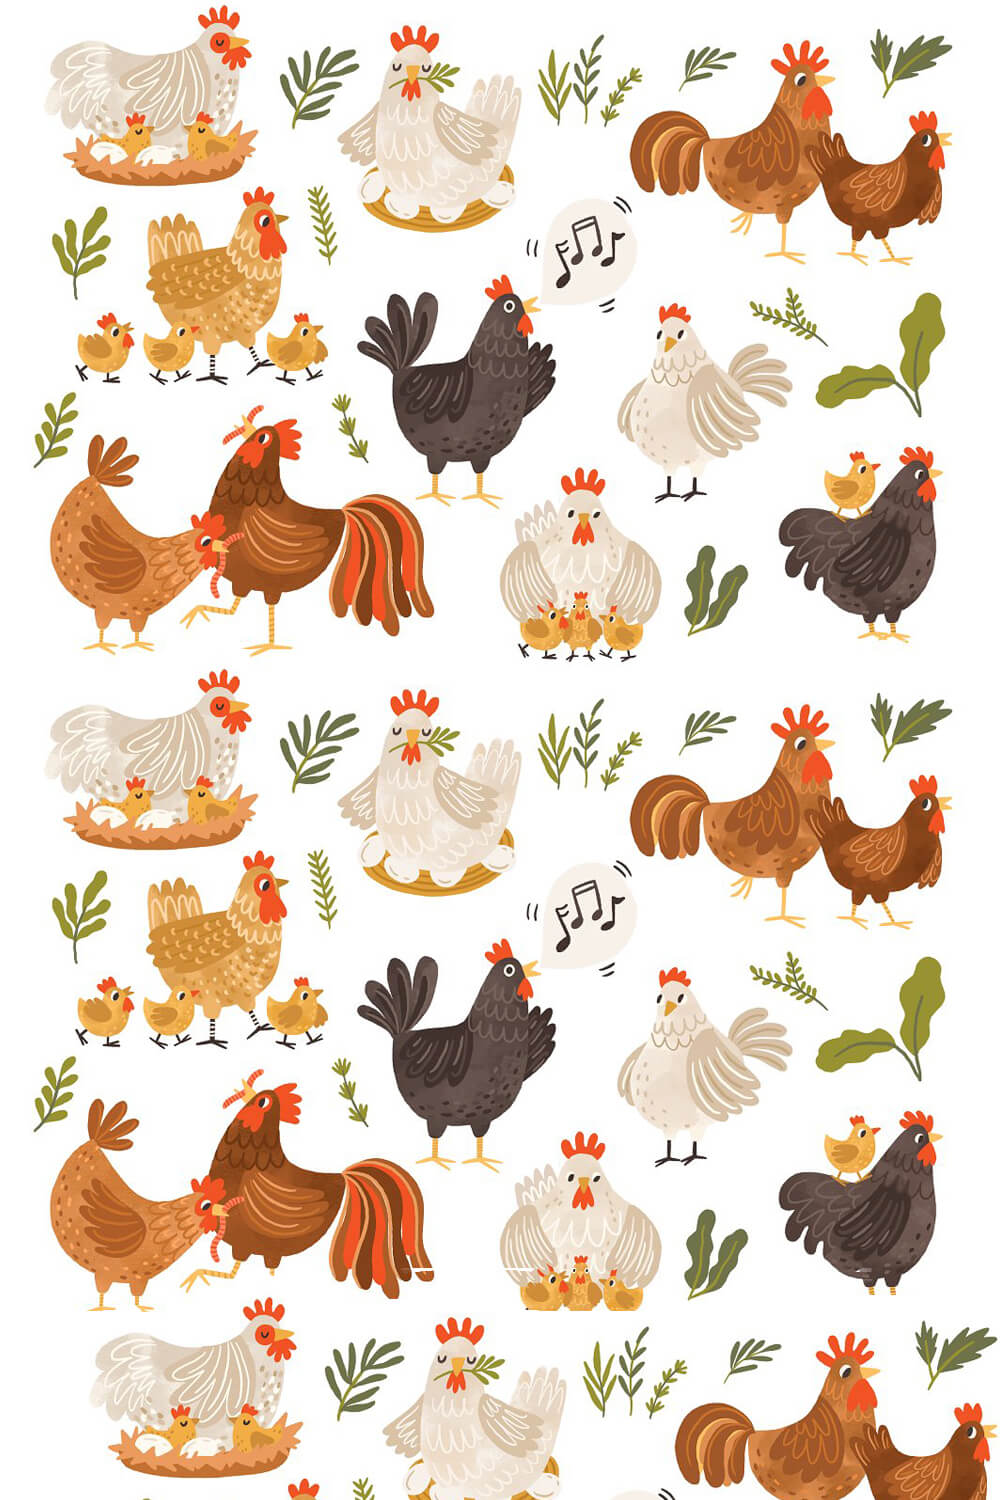 Lots of chickens and green vegetation.